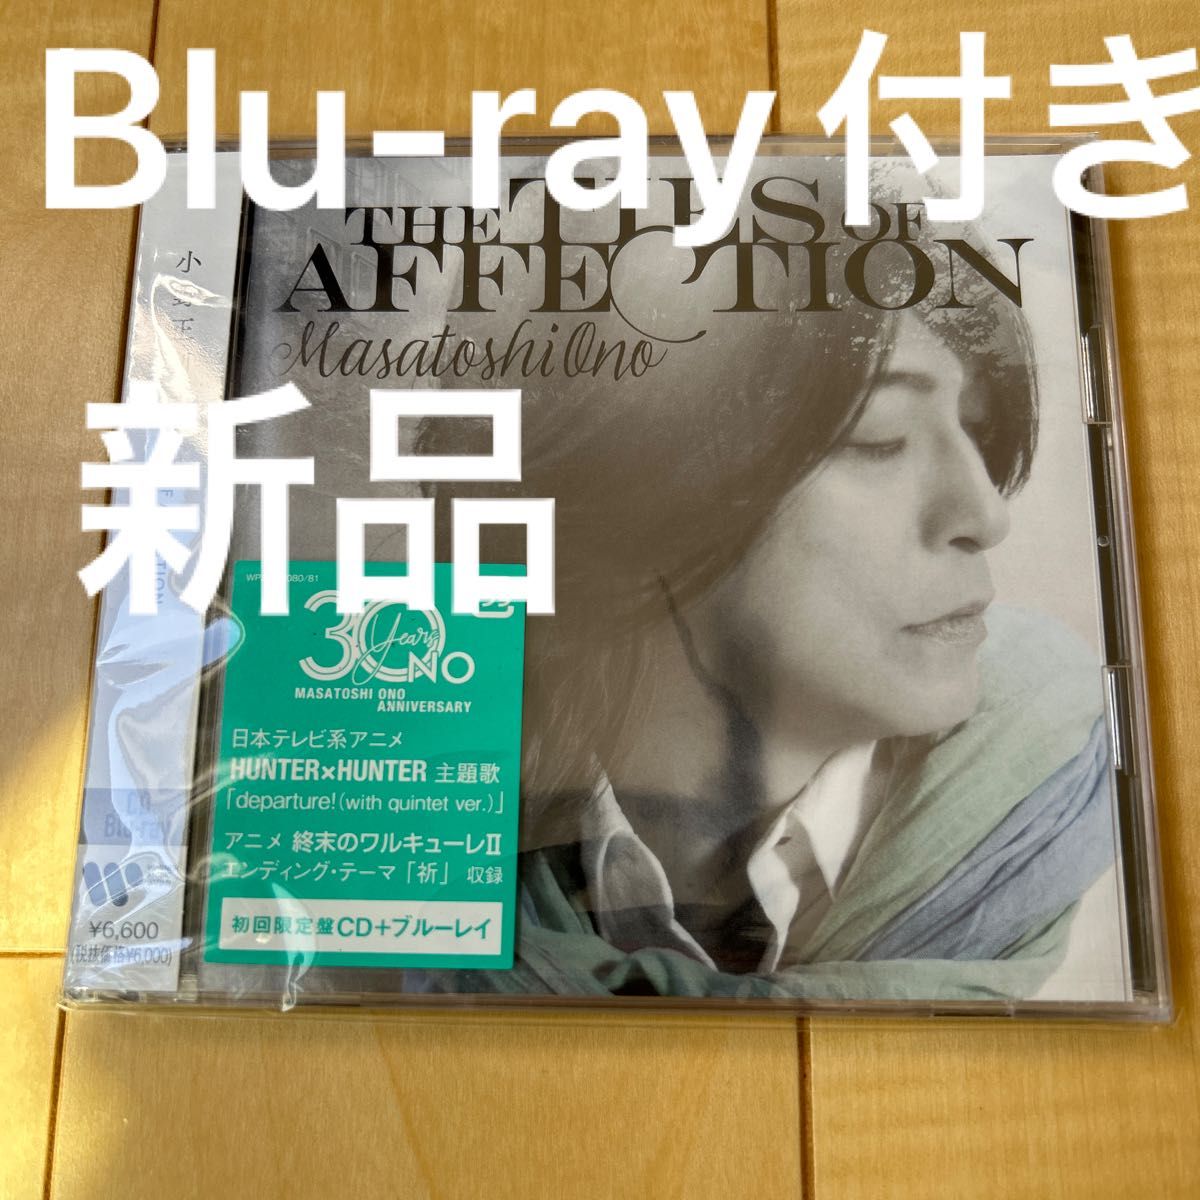 CD 小野正利/THE TIES OF AFFECTION 初回限定盤 [ワーナーミュージックジャパン]